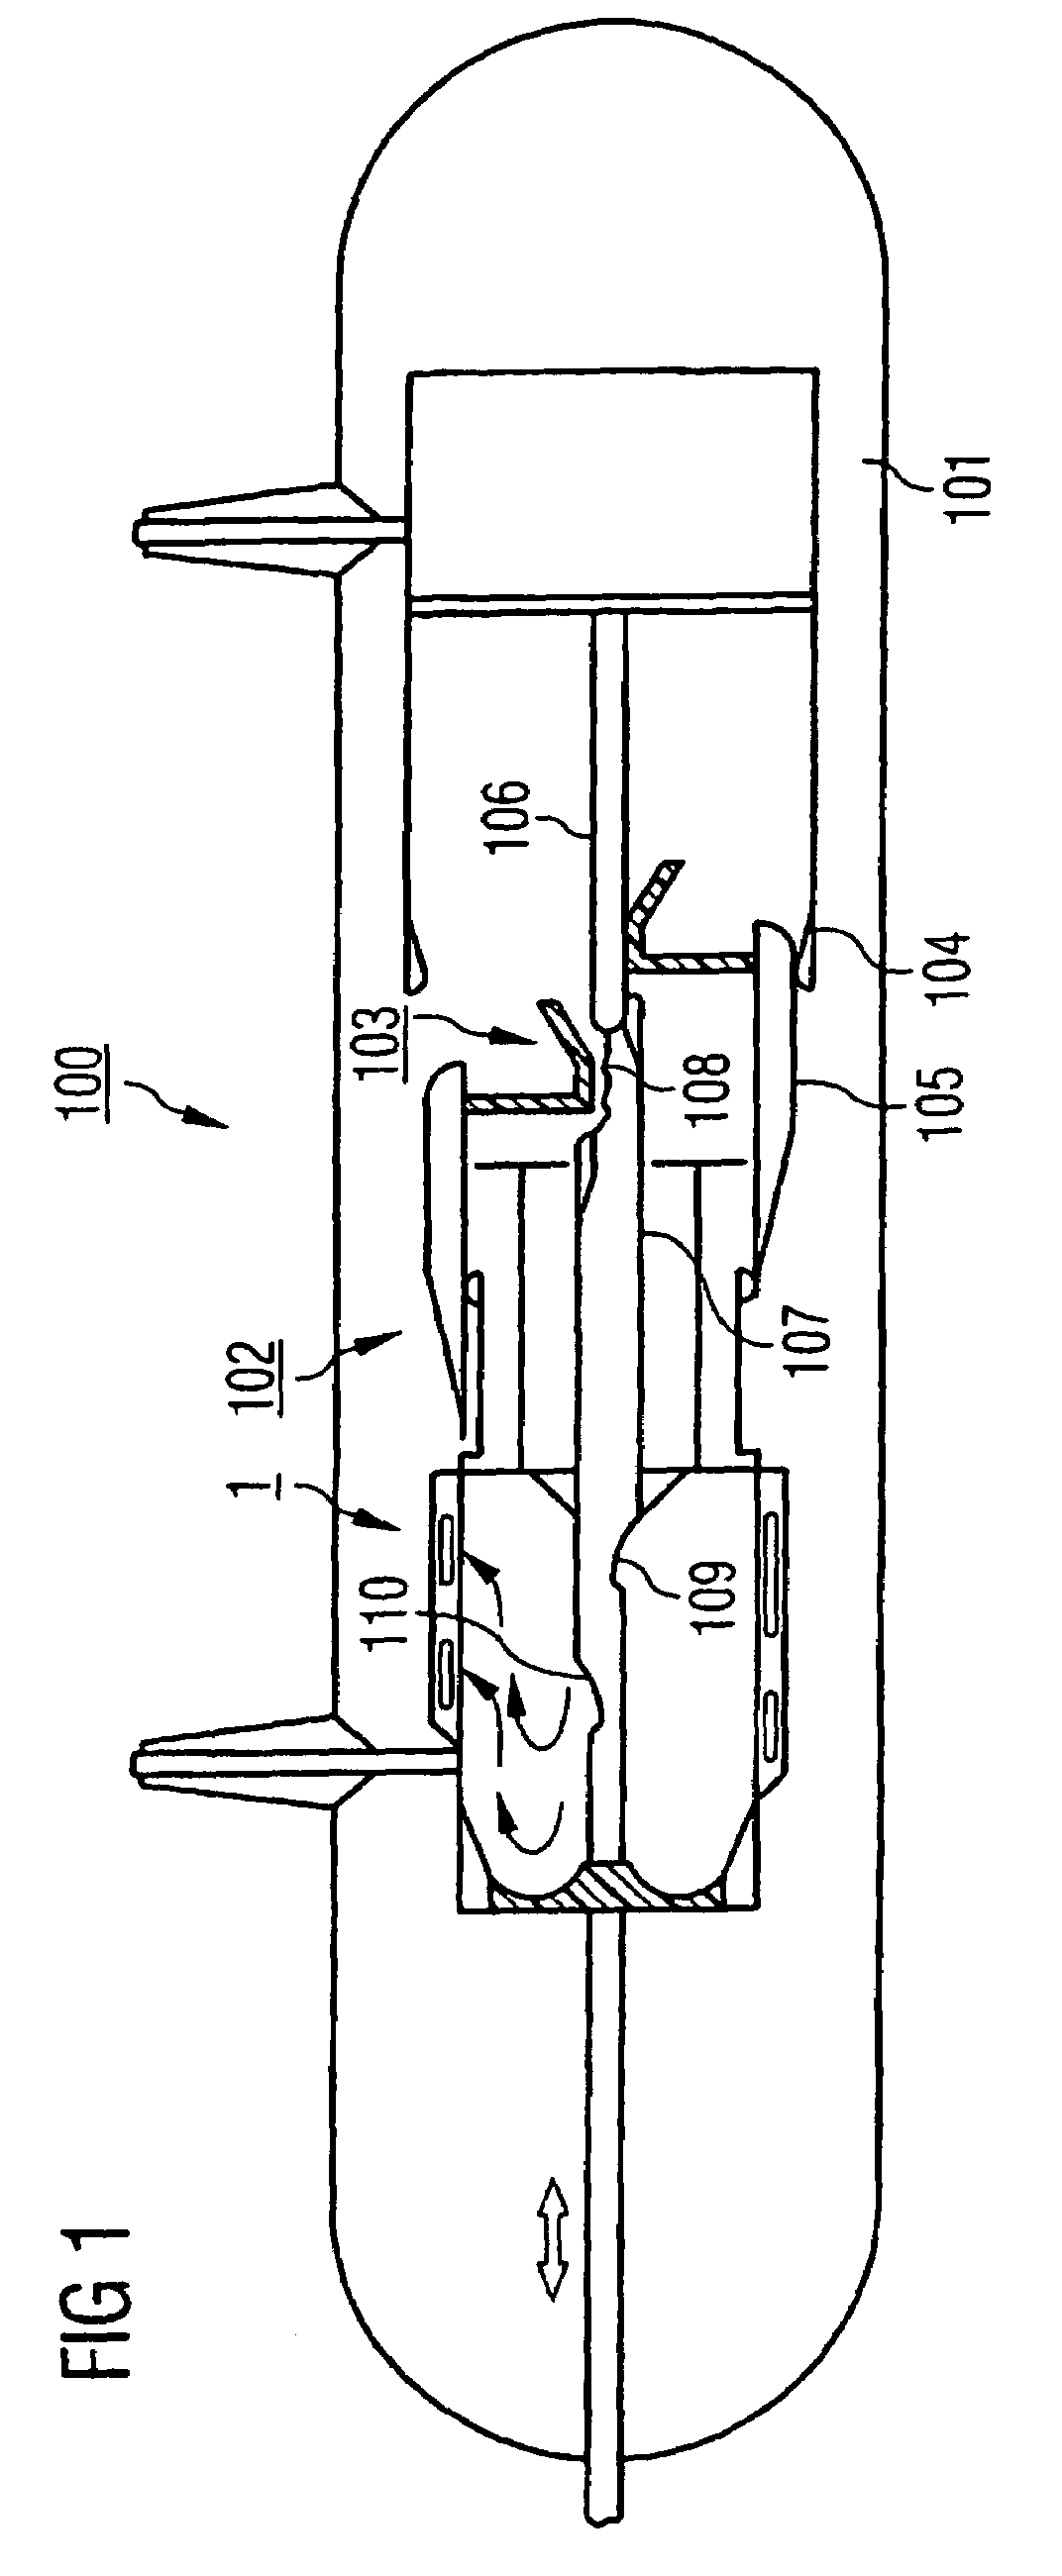 Power switch with a mobile contact element and extinction gas flow that move in an axial direction when activated